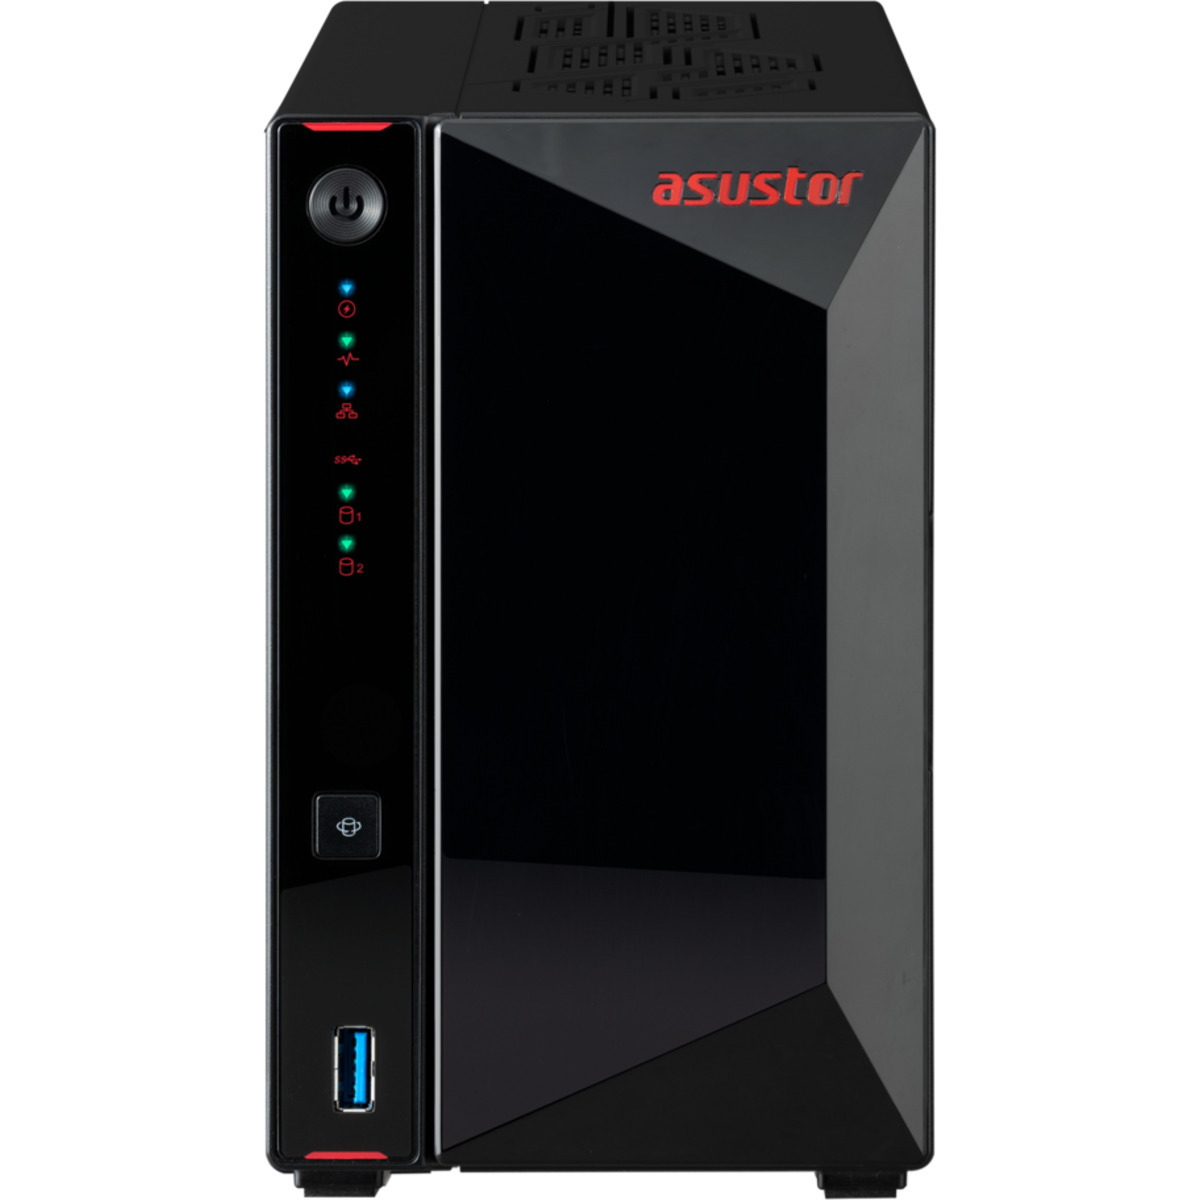 ASUSTOR Nimbustor 2 Gen2 AS5402T 12tb 2-Bay Desktop Multimedia / Power User / Business NAS - Network Attached Storage Device 1x12tb Seagate IronWolf Pro ST12000NT001 3.5 7200rpm SATA 6Gb/s HDD NAS Class Drives Installed - Burn-In Tested - ON SALE - FREE RAM UPGRADE Nimbustor 2 Gen2 AS5402T